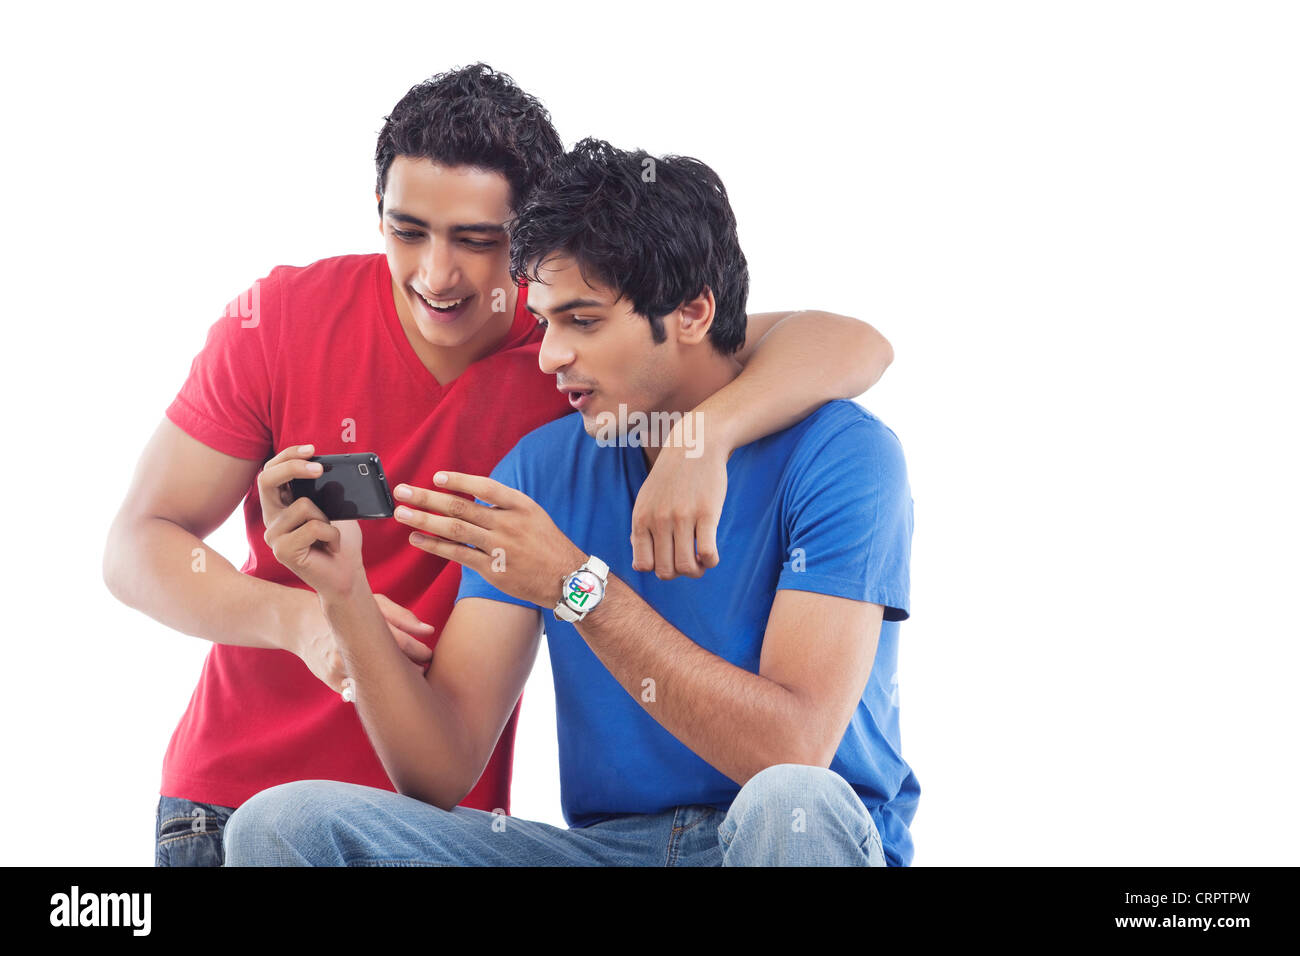 Two young friends sharing photo message over white background Stock Photo